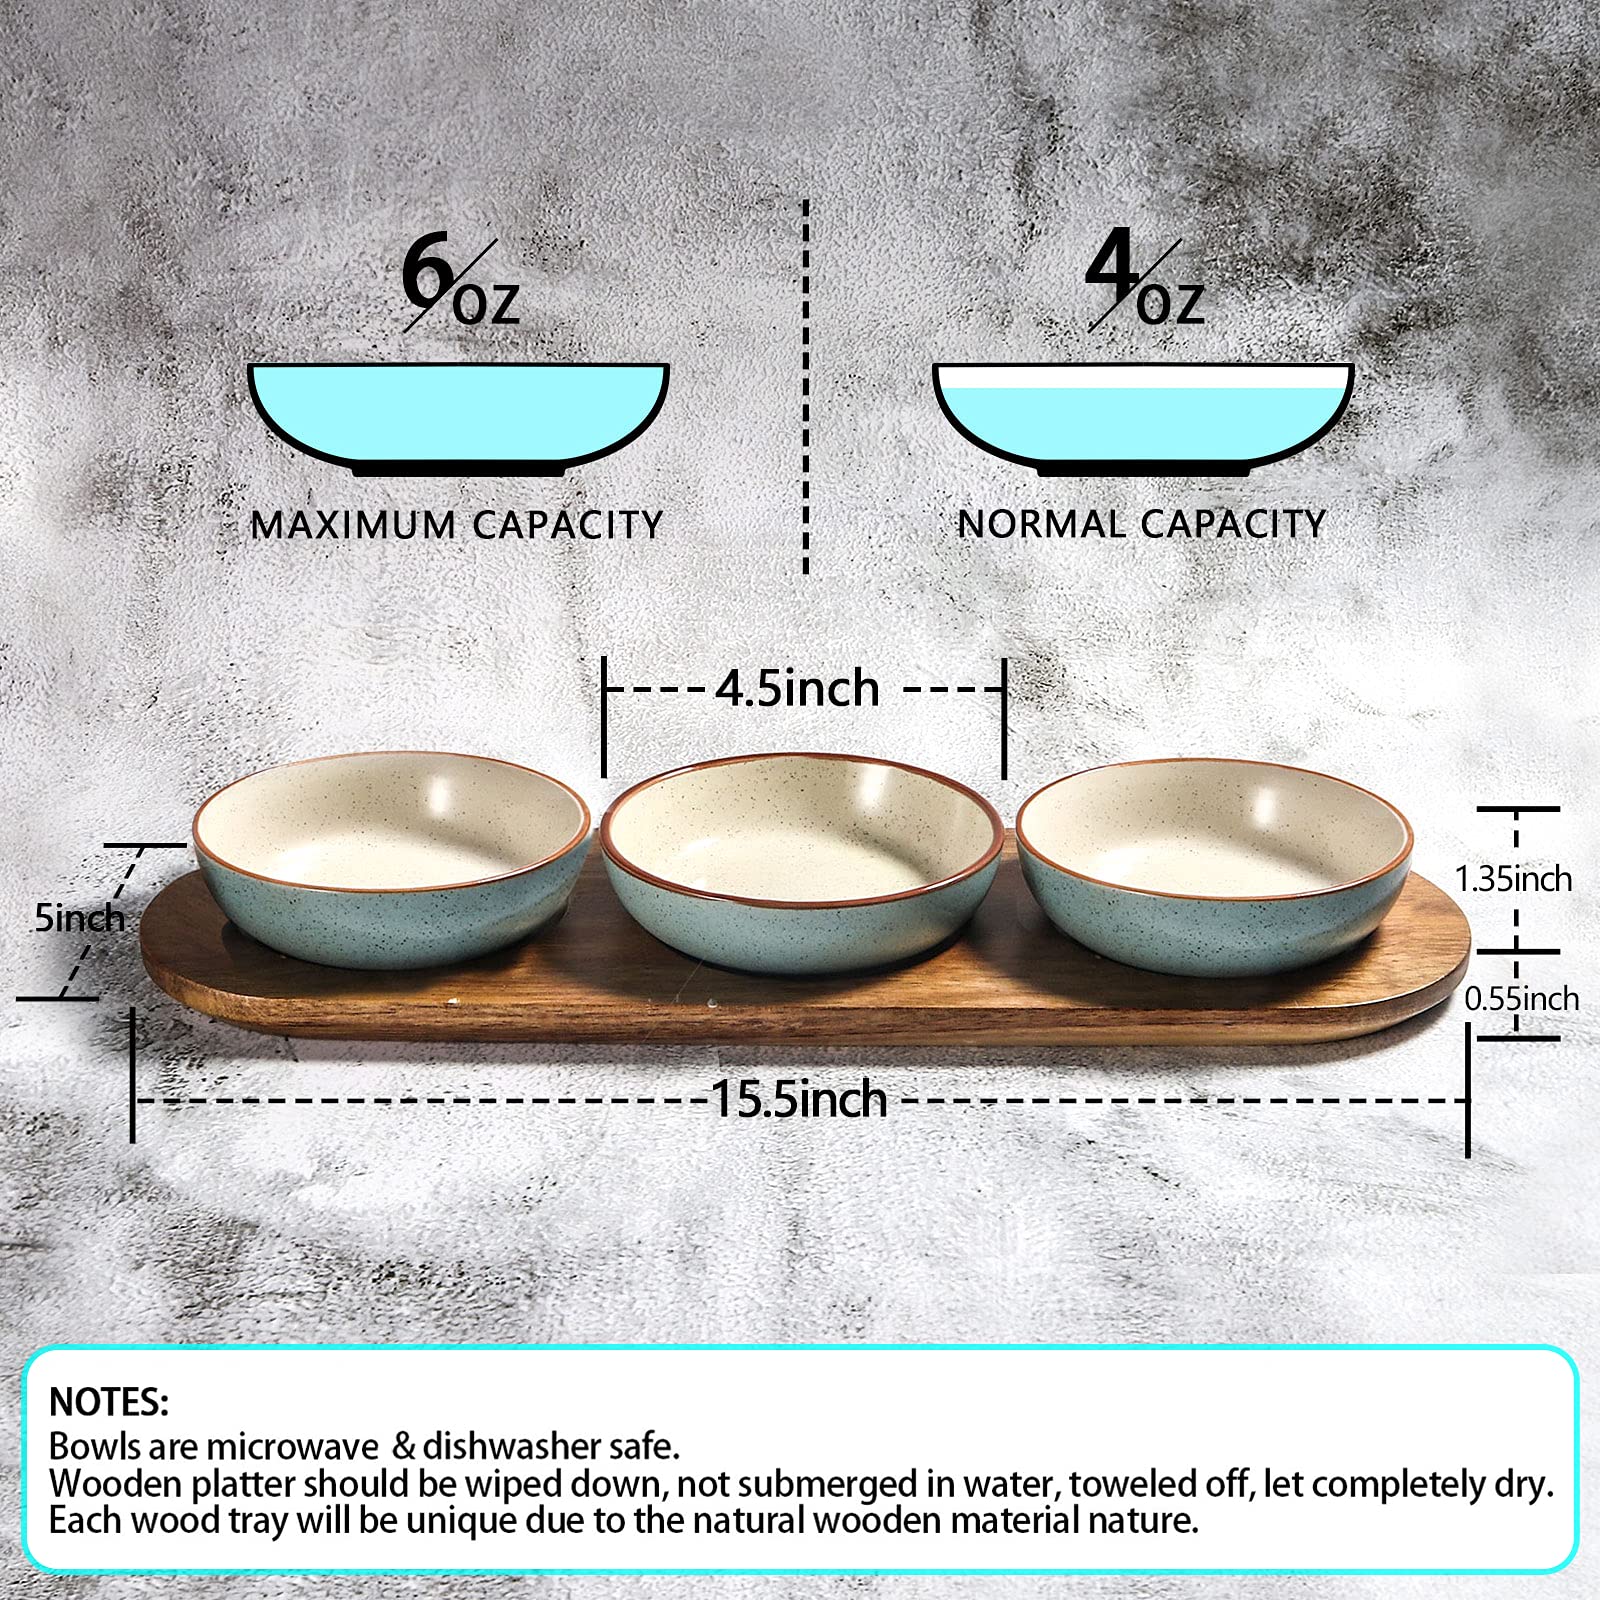 Artena 6oz Turquoise Solid Ceramic Chips and Dip Serving Platter with Acacia Wooden Tray & Bright White 6.75 inch Asian Soup Spoons Set of 6